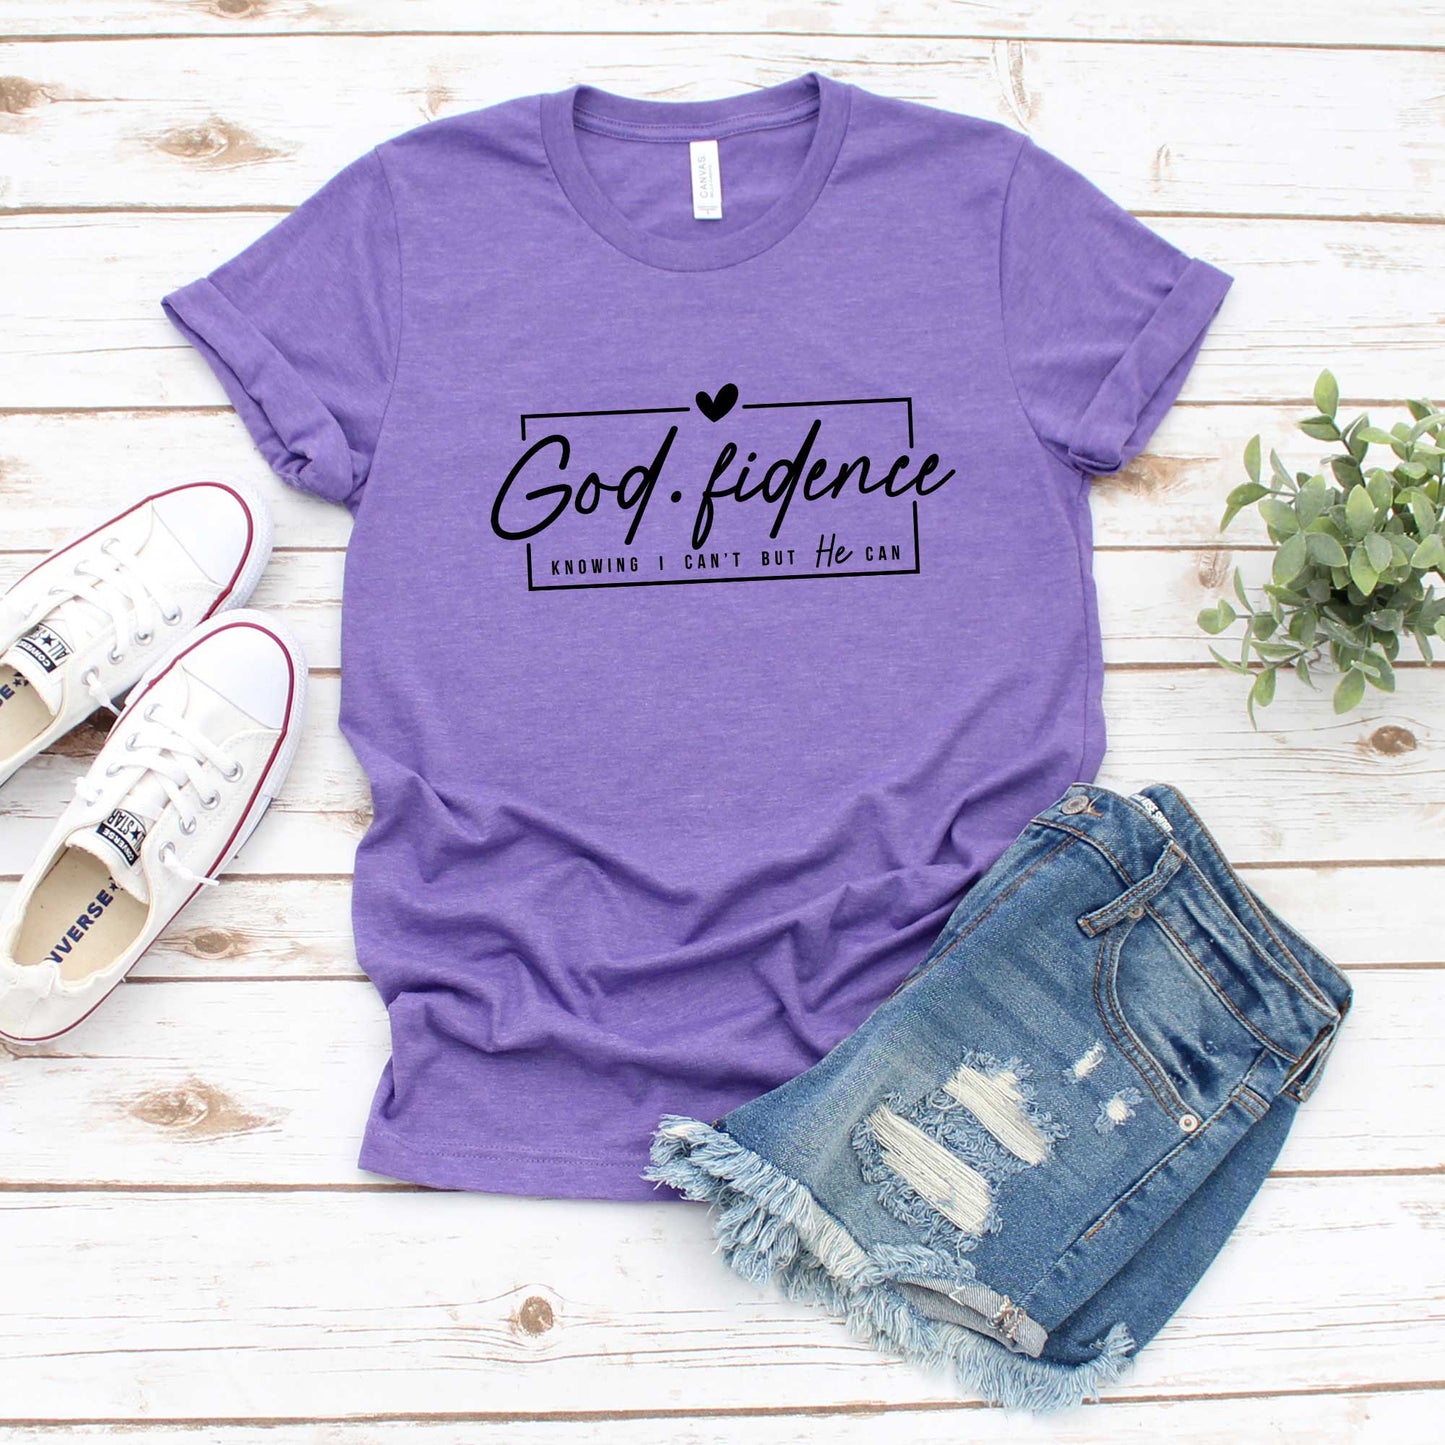 Godfidence Knowing I Can't But He Can | Short Sleeve Crew Neck